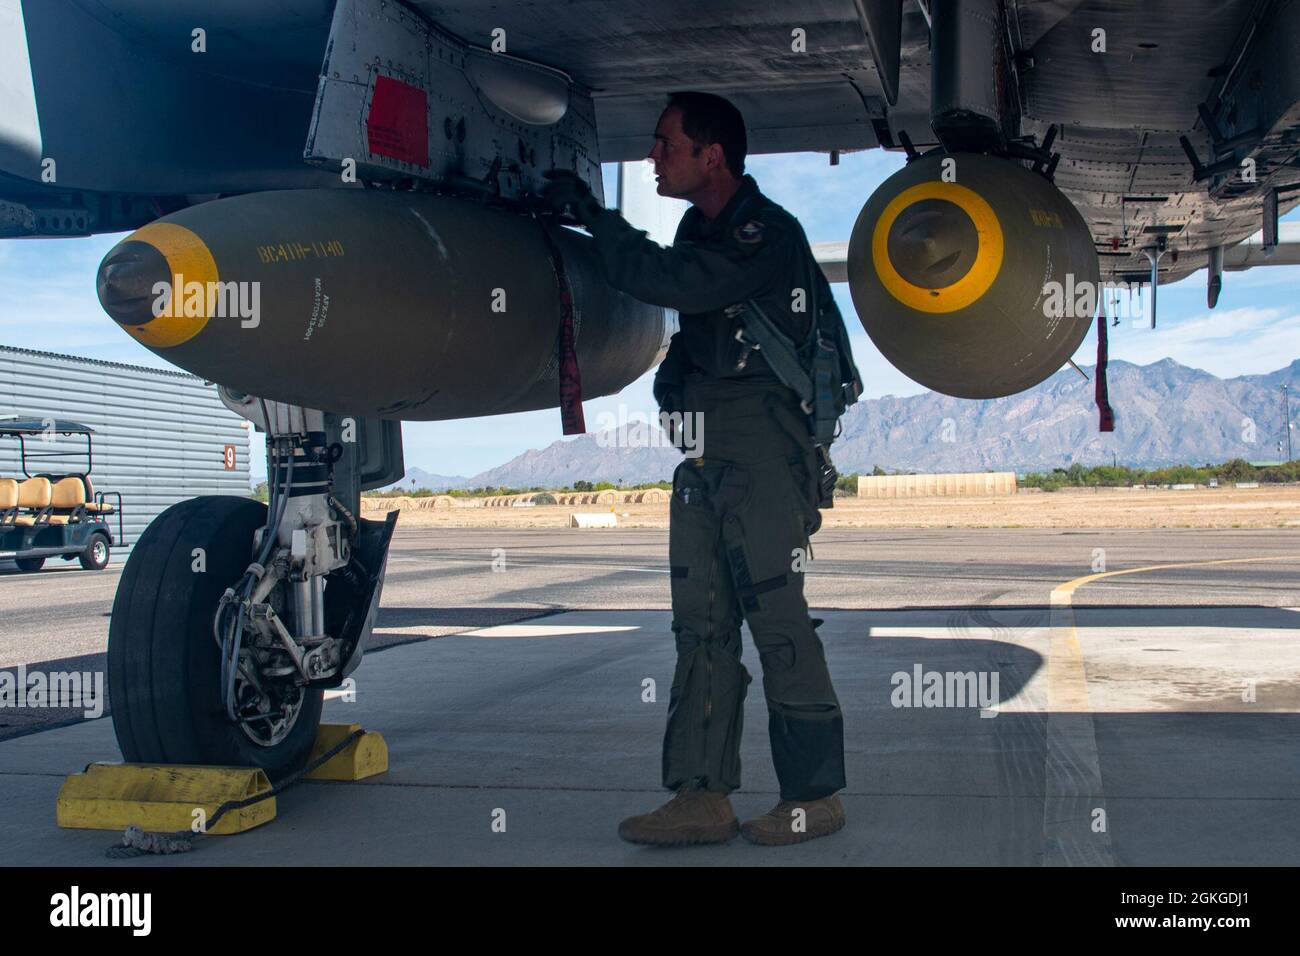 A U.S. Air Force A-10 Thunderbolt II pilot from the 40th Flight Test Squadron conducts pre-flight inspections at Davis-Monthan Air Force Base, Arizona, April 15, 2021. The 40th FTS trained new capabilities using four 2000lb bombs attached to the aircraft. Stock Photo